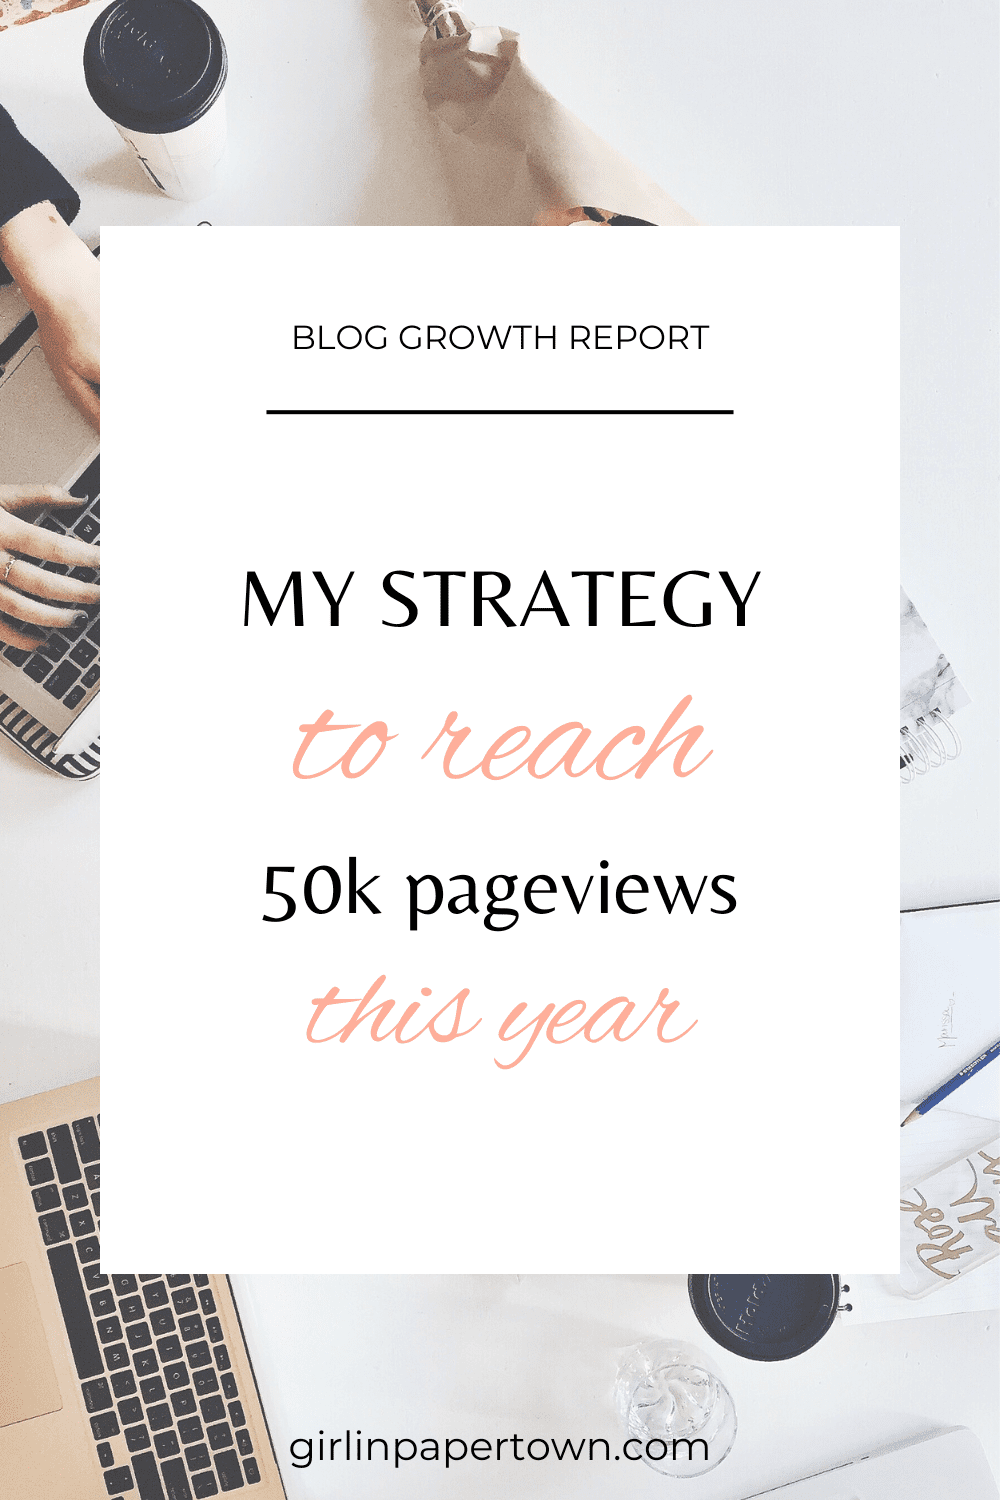 My strategy to reach 50k pageviews this year - blog growth report